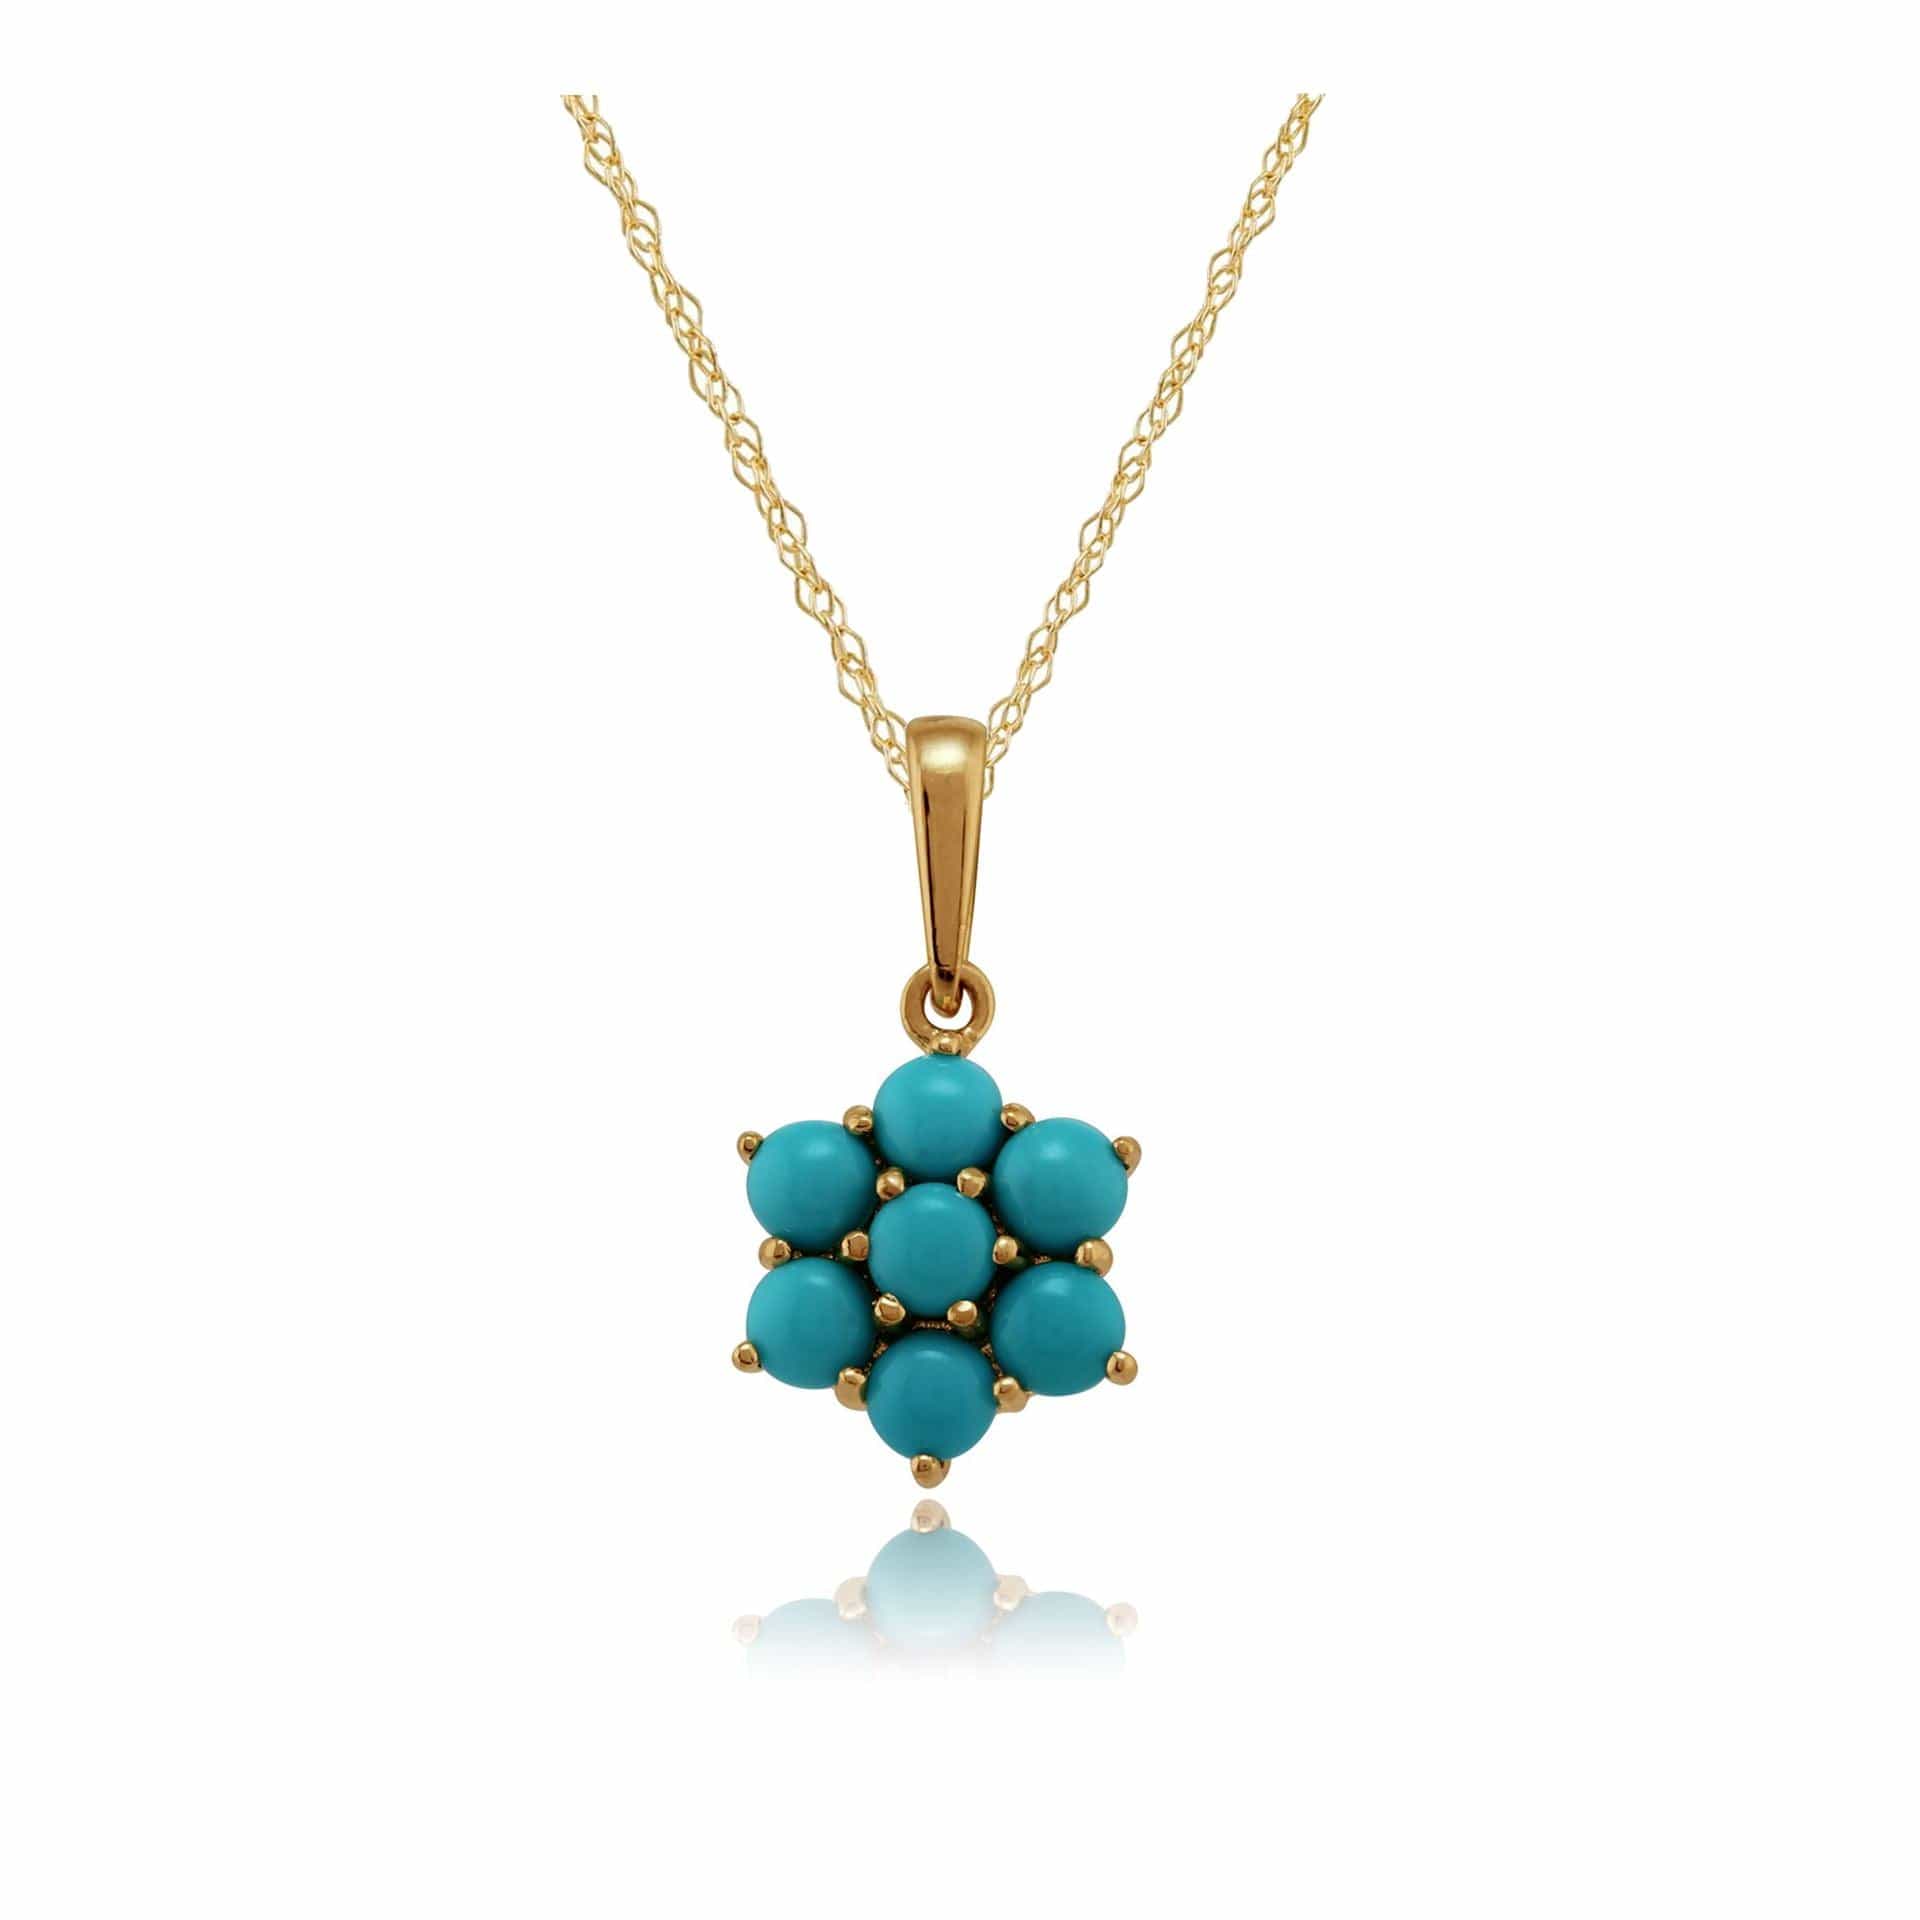 Floral Turquoise Pendant on Chain Image 1